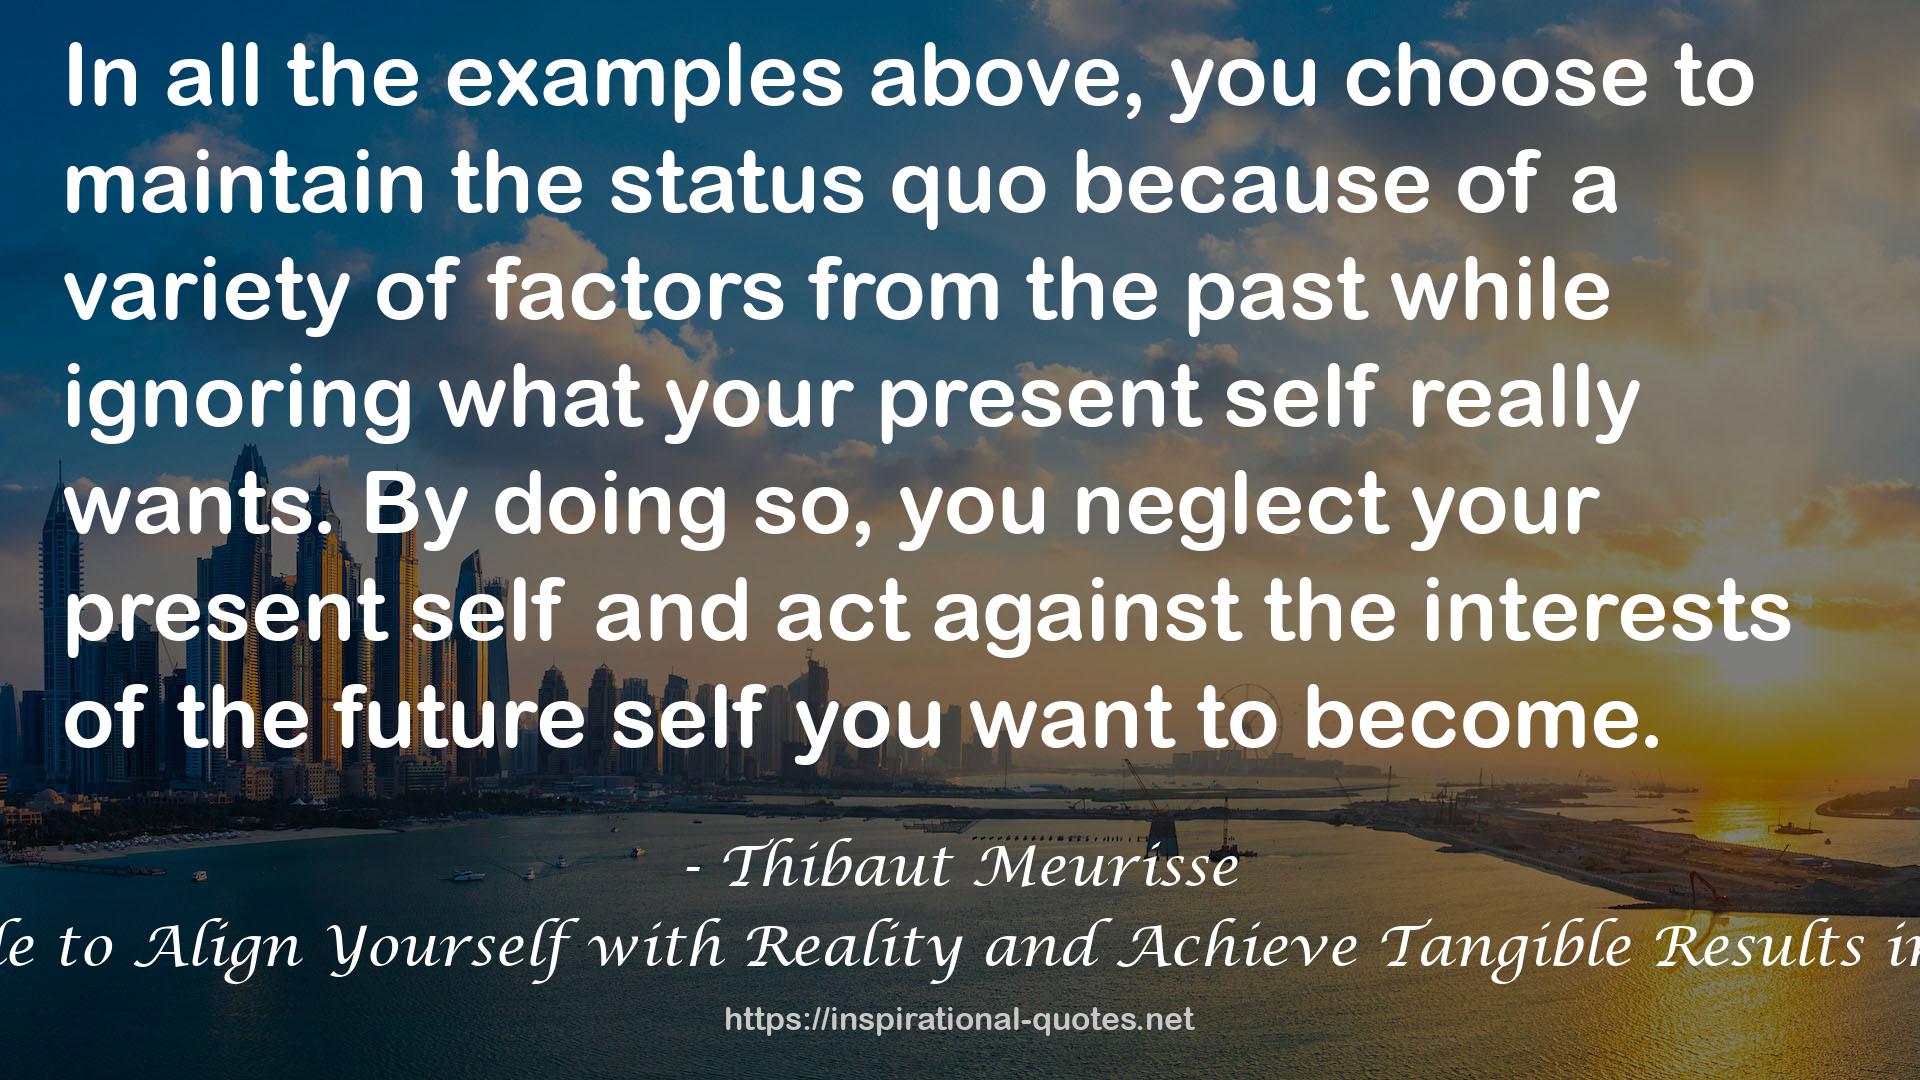 Master Your Thinking: A Practical Guide to Align Yourself with Reality and Achieve Tangible Results in the Real World (Mastery Series Book 5) QUOTES